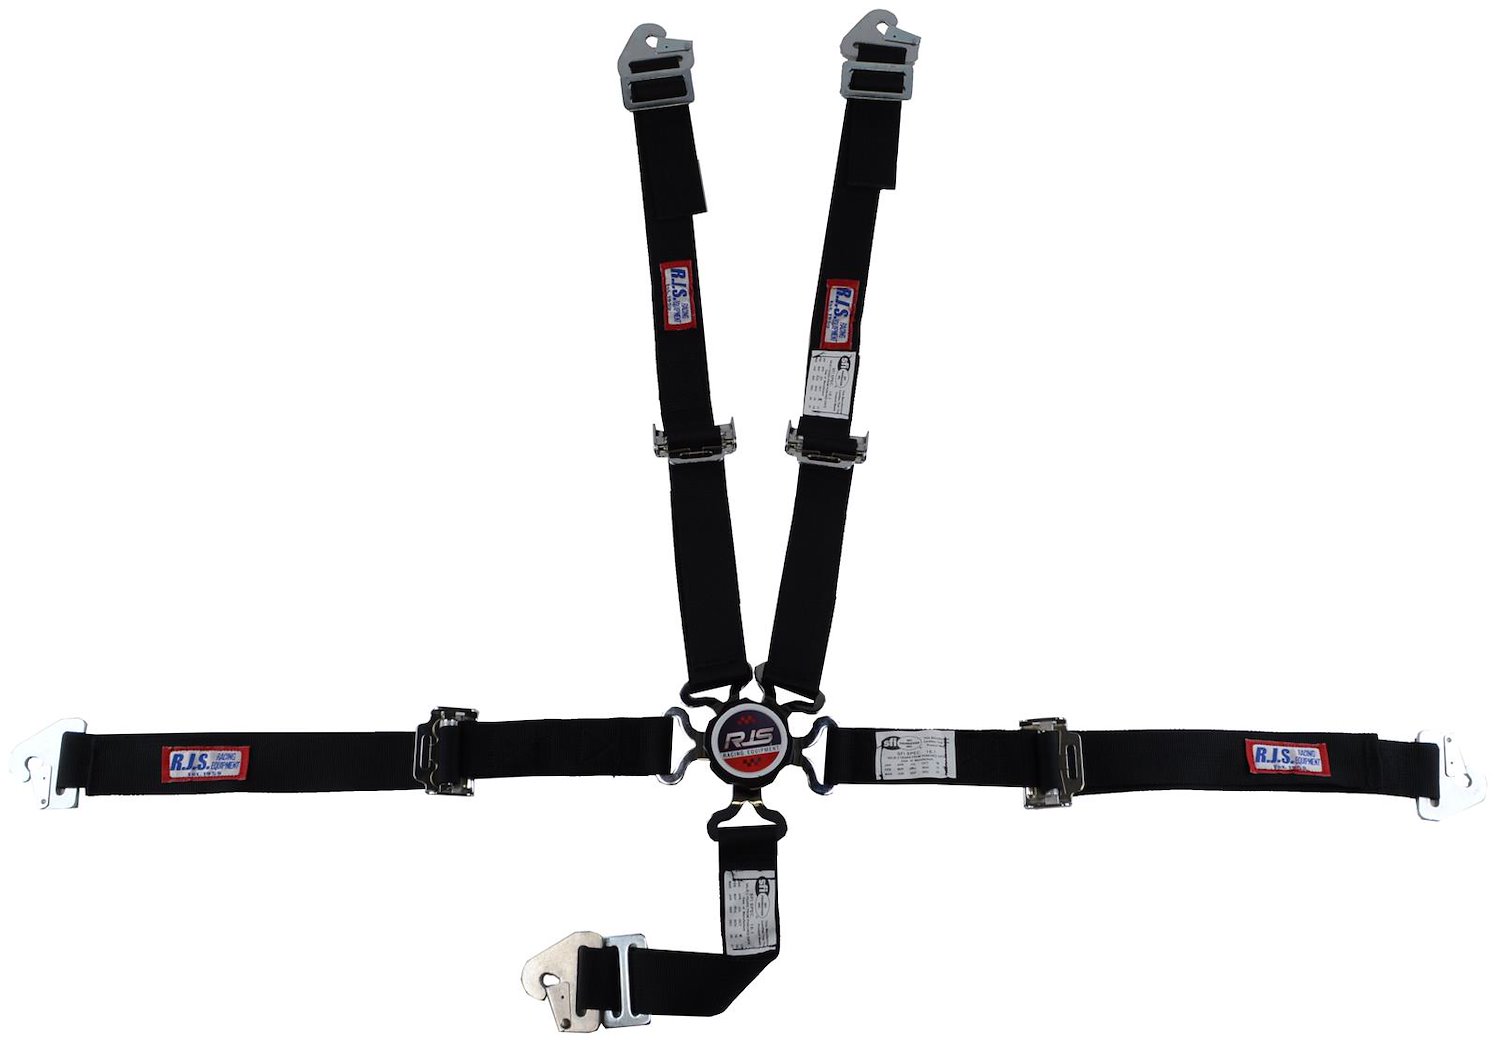 SFI 16.1 CAM-LOCK HARNESS 2 PULL UP Lap Belt 2 Shoulder Harness Individual FLOOR Mount 2 DOUBLESub ALL WRAP/BOLT ENDS GRAY